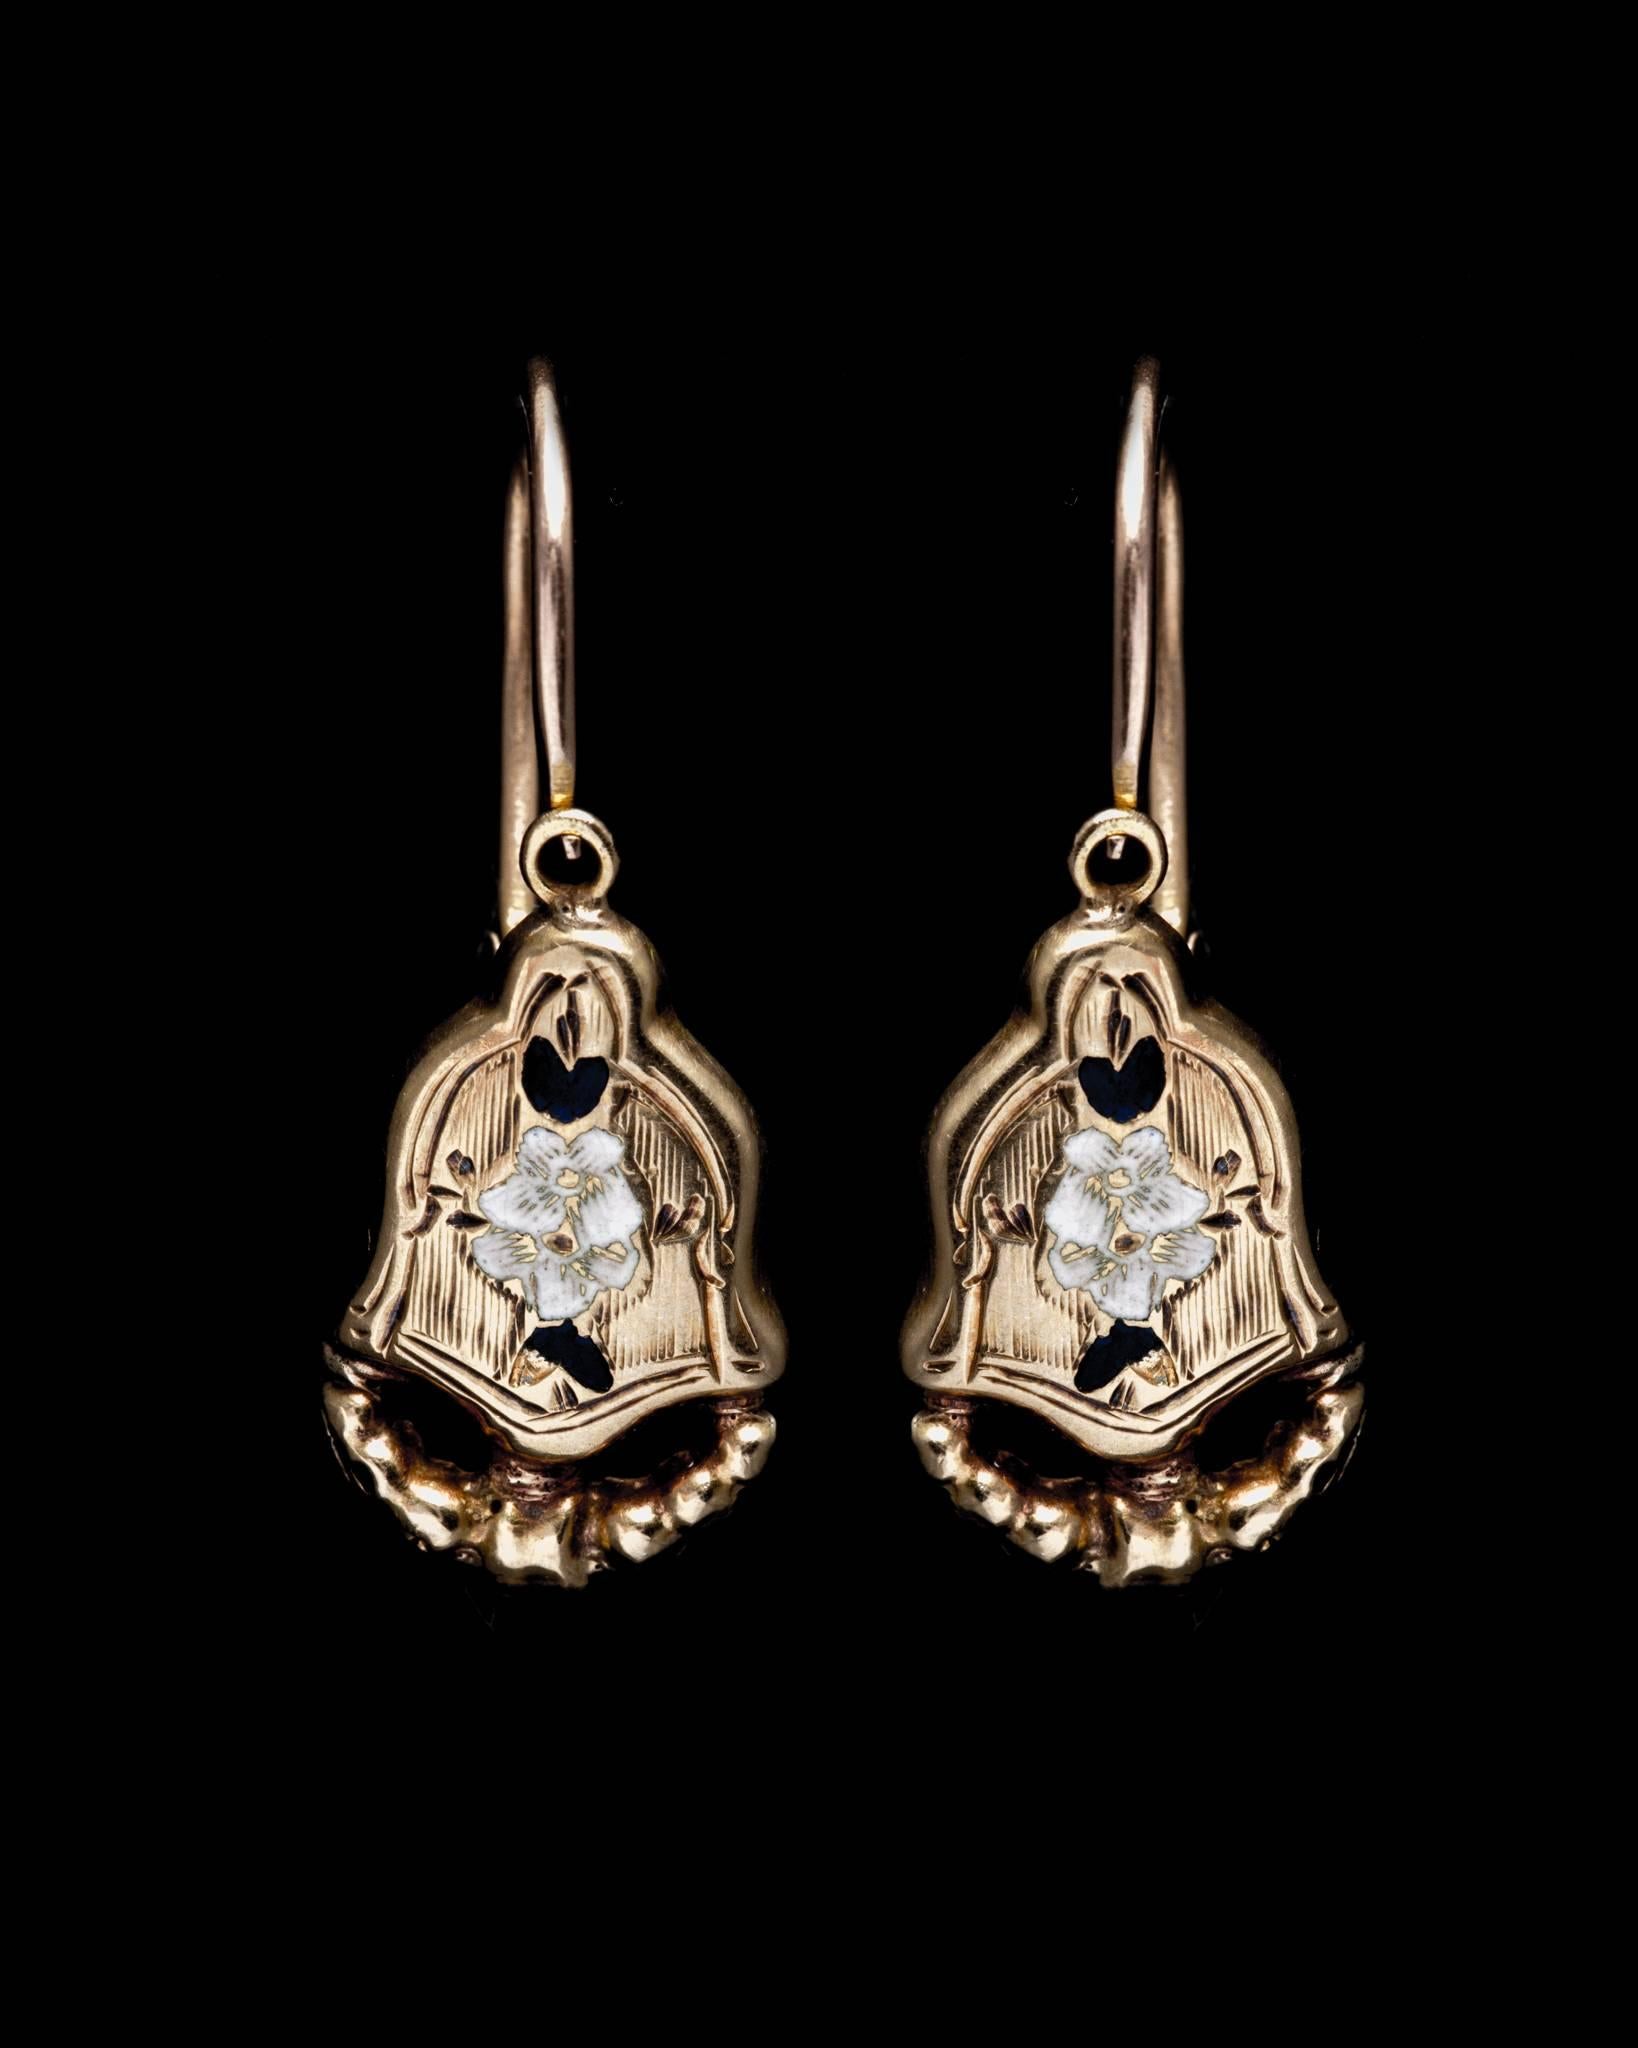 Beacon Hill Jewelers Presents:

An antique pair of mid 19th century French hallmarked day and night earrings in yellow gold.  Designed to be worn as a smaller pair of lever back earrings during the day, these earrings also come with an extended